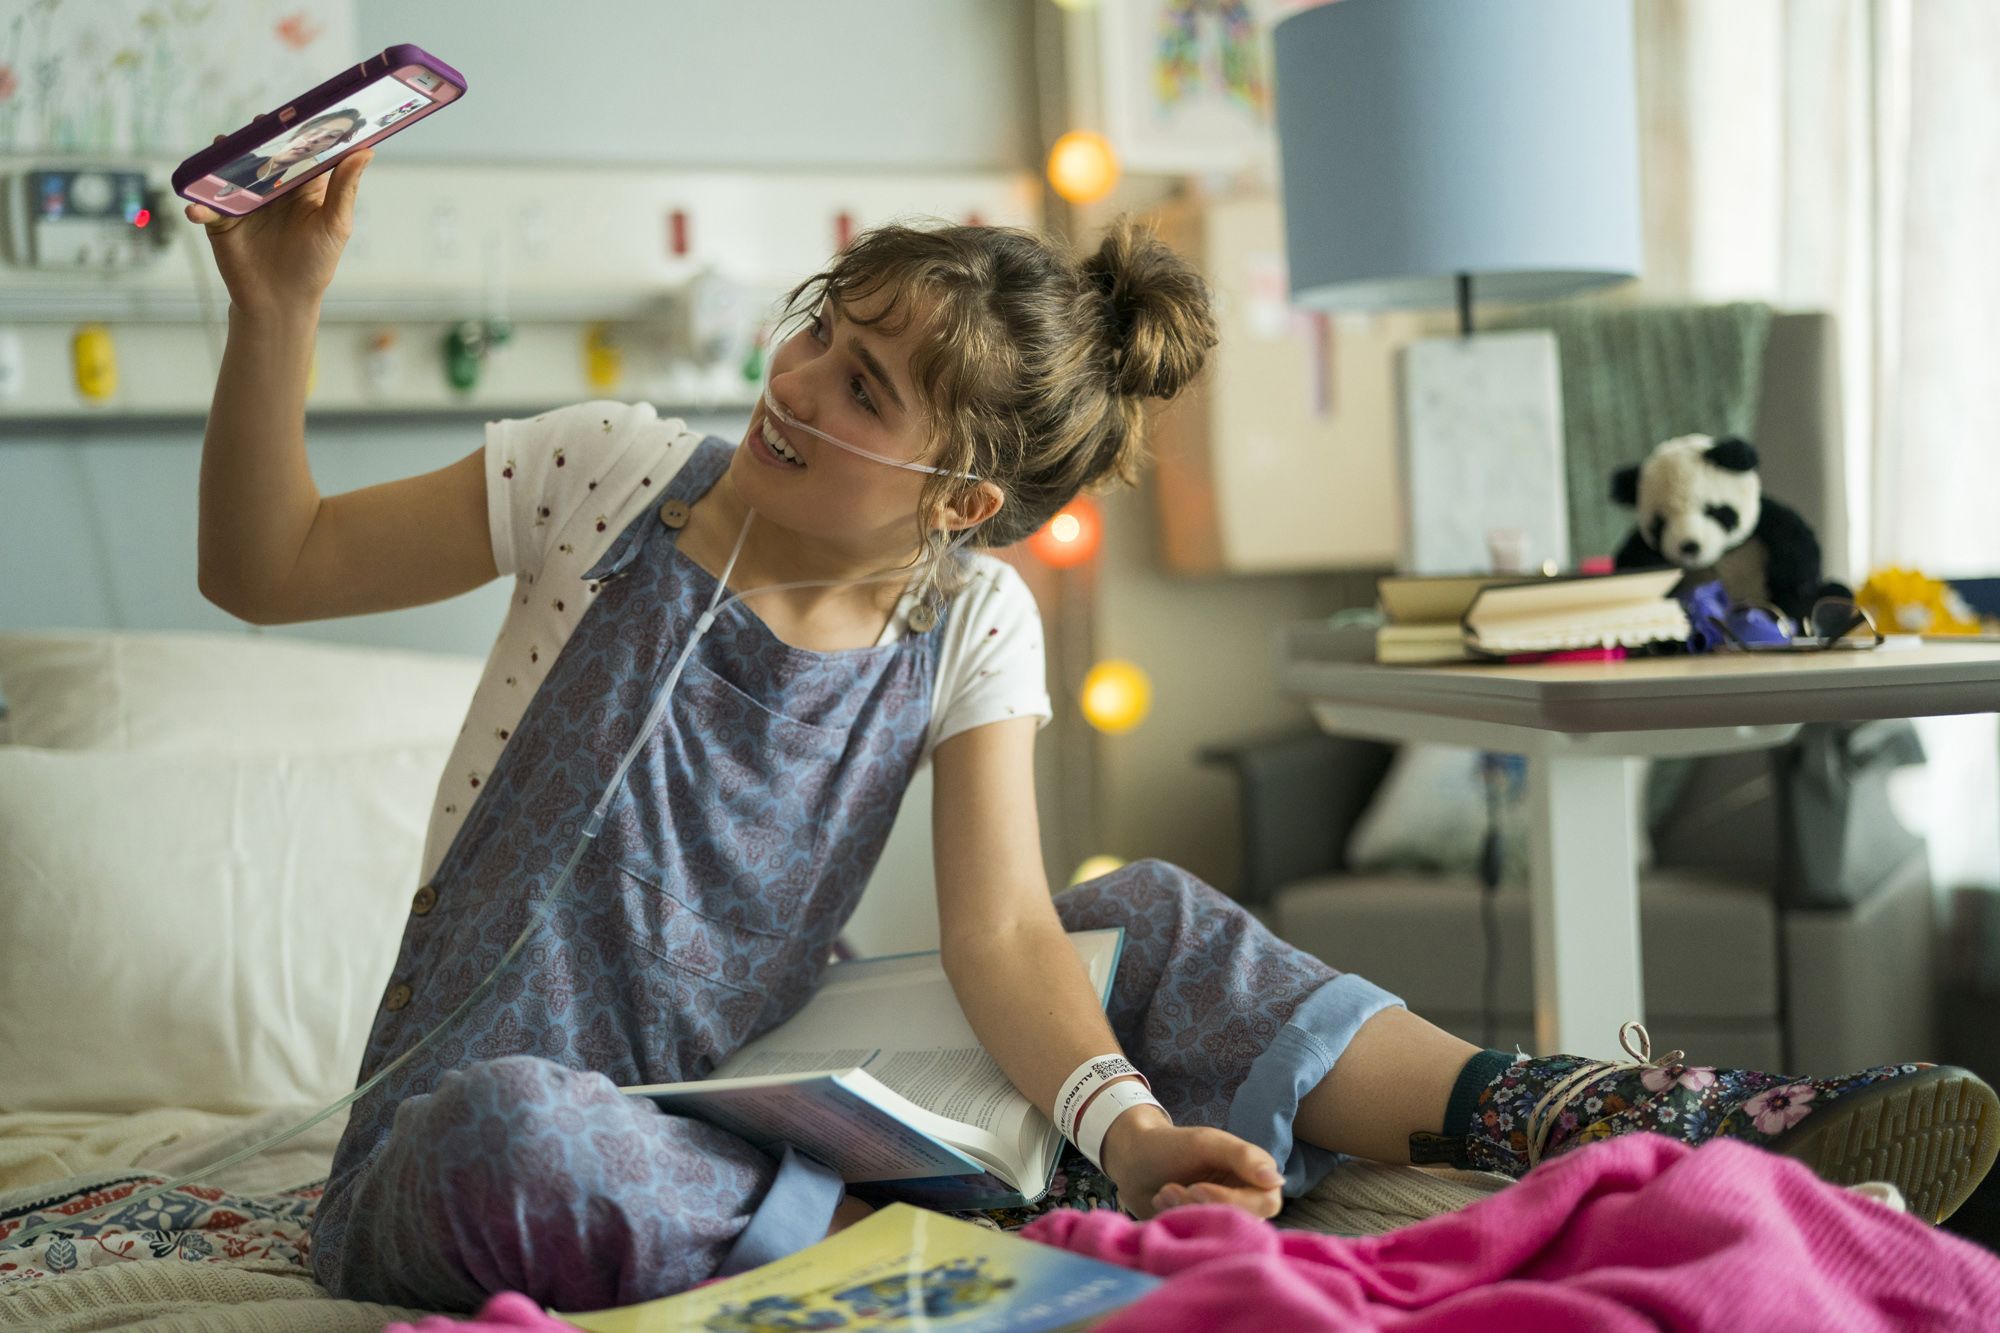 Five Feet Apart' review: Haley Lu Richardson, Cole Sprouse star in